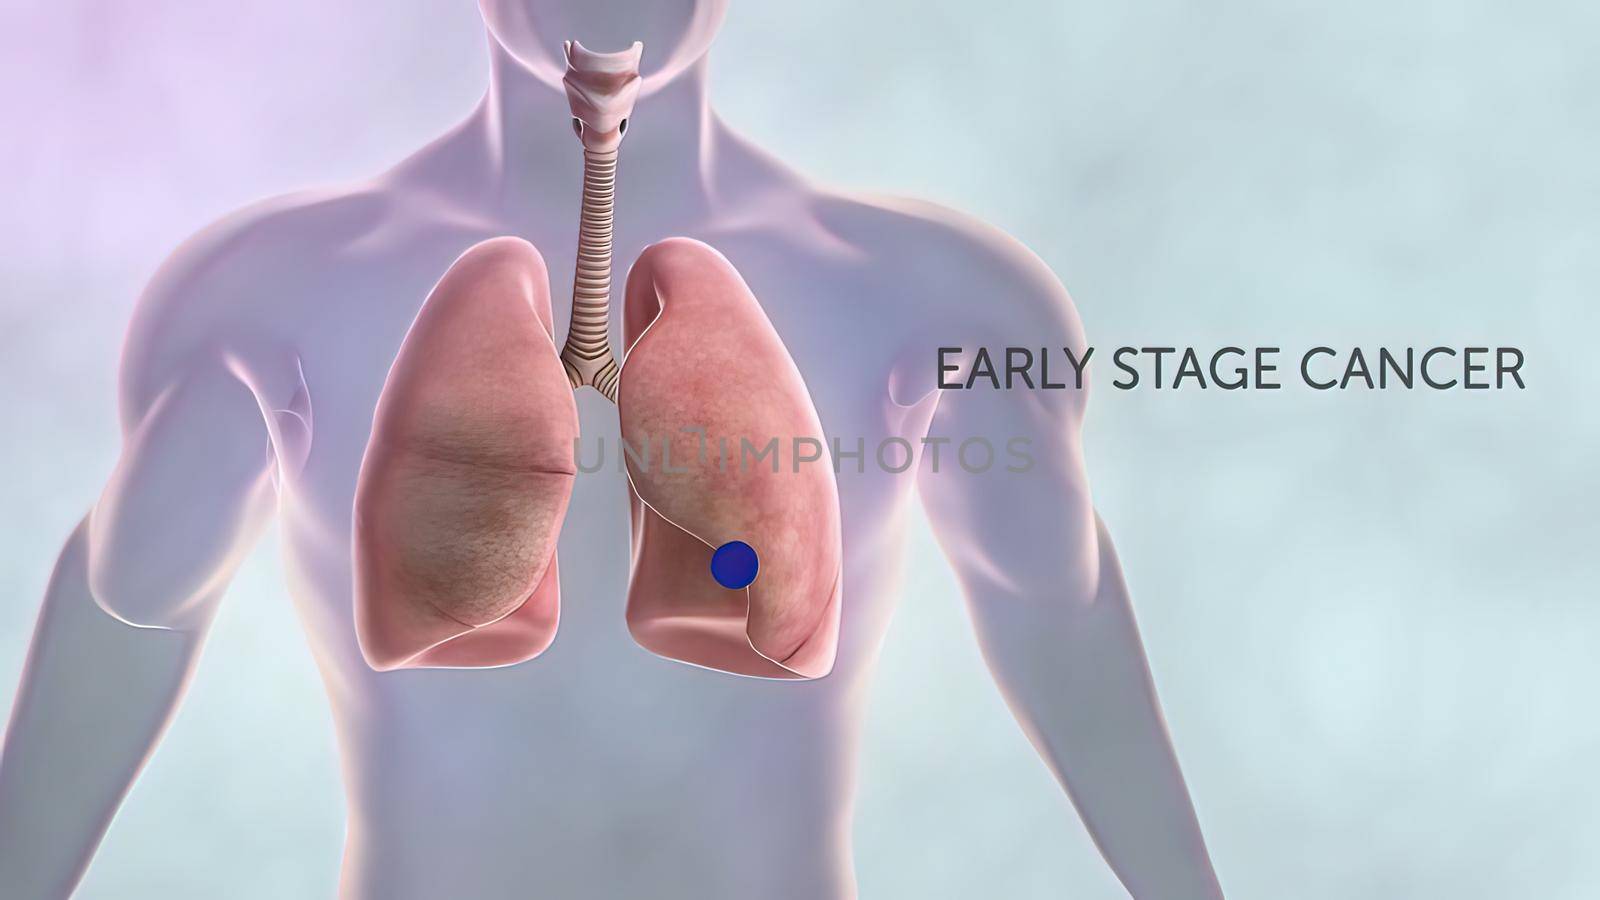 Early stage cancer and advanced stages of cancer. 3D illustration